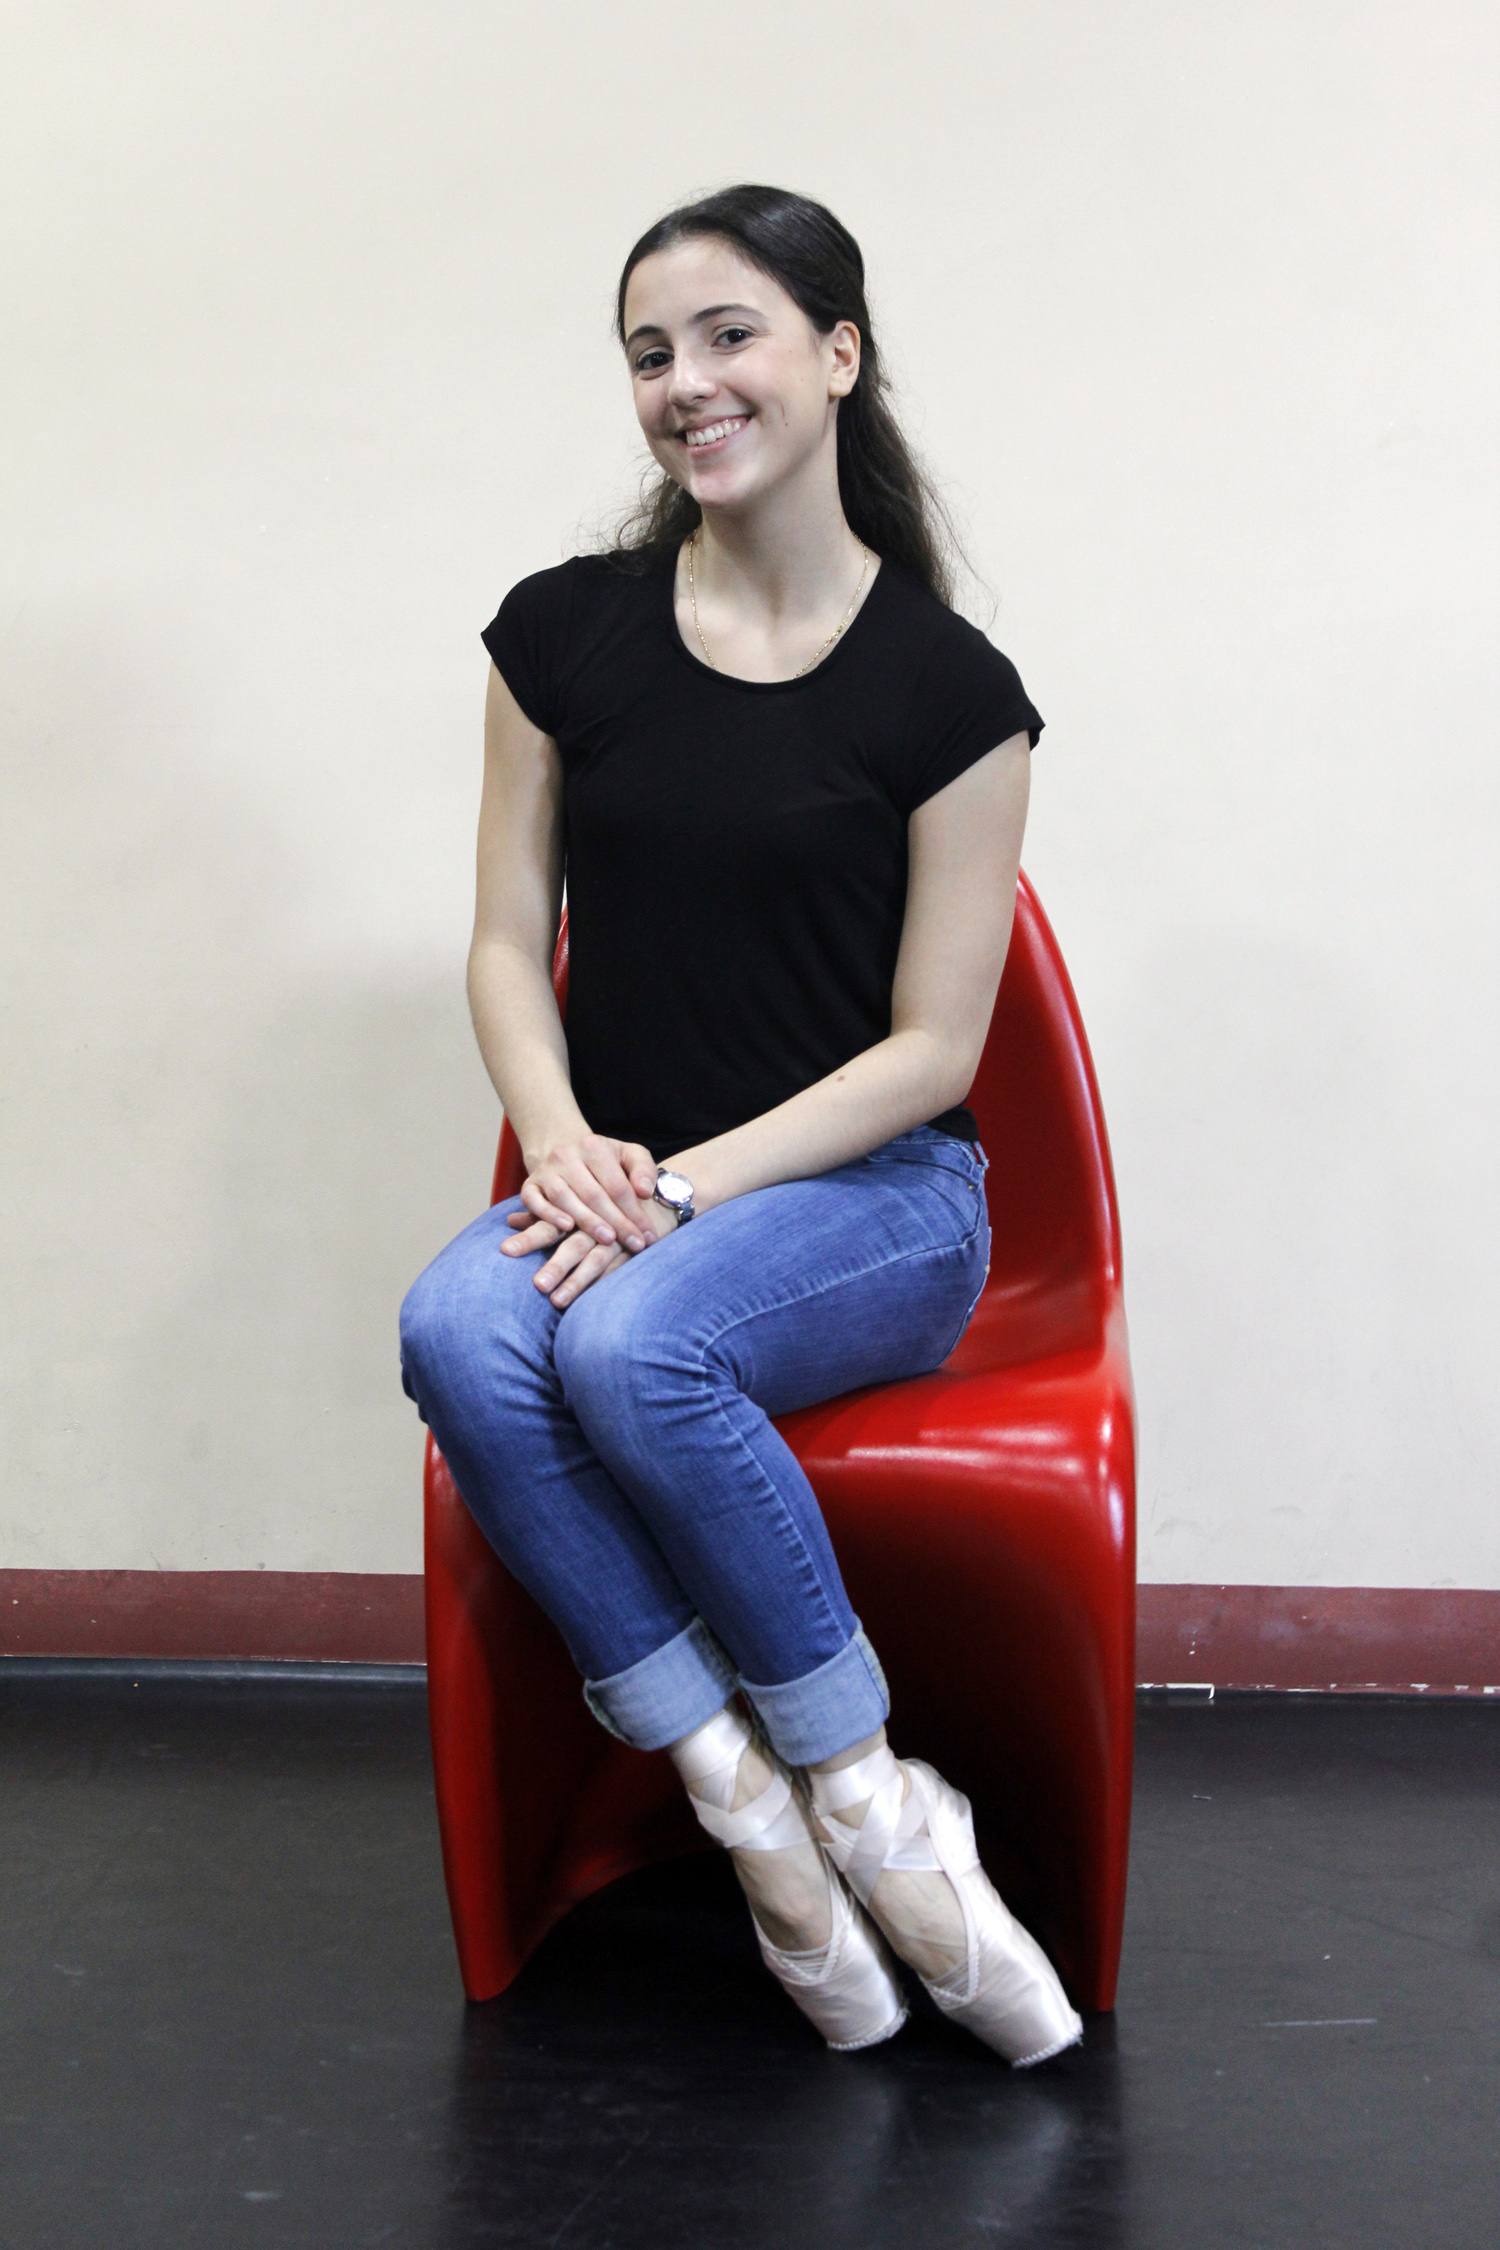 Although she misses home, Katherine is happy to be dancing with Ballet Manila. “My world is always ballet,” she says. Photo by Jimmy Villanueva